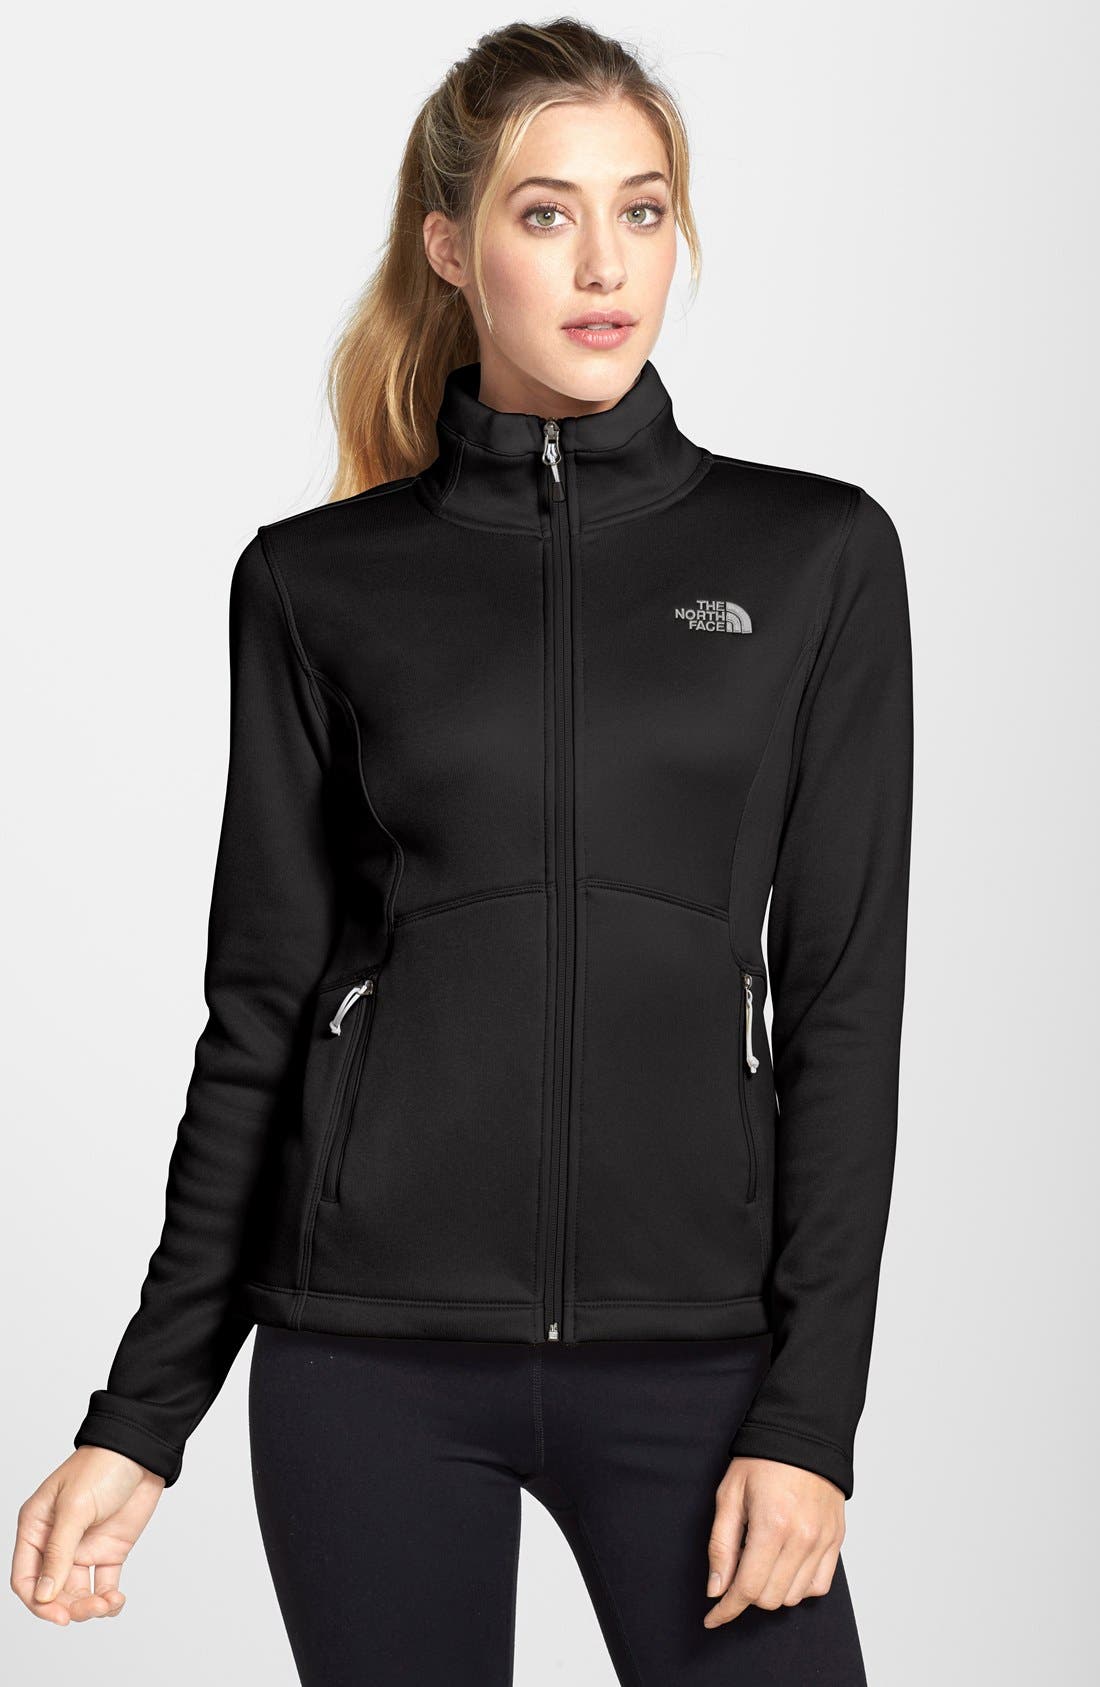 north face agave jacket